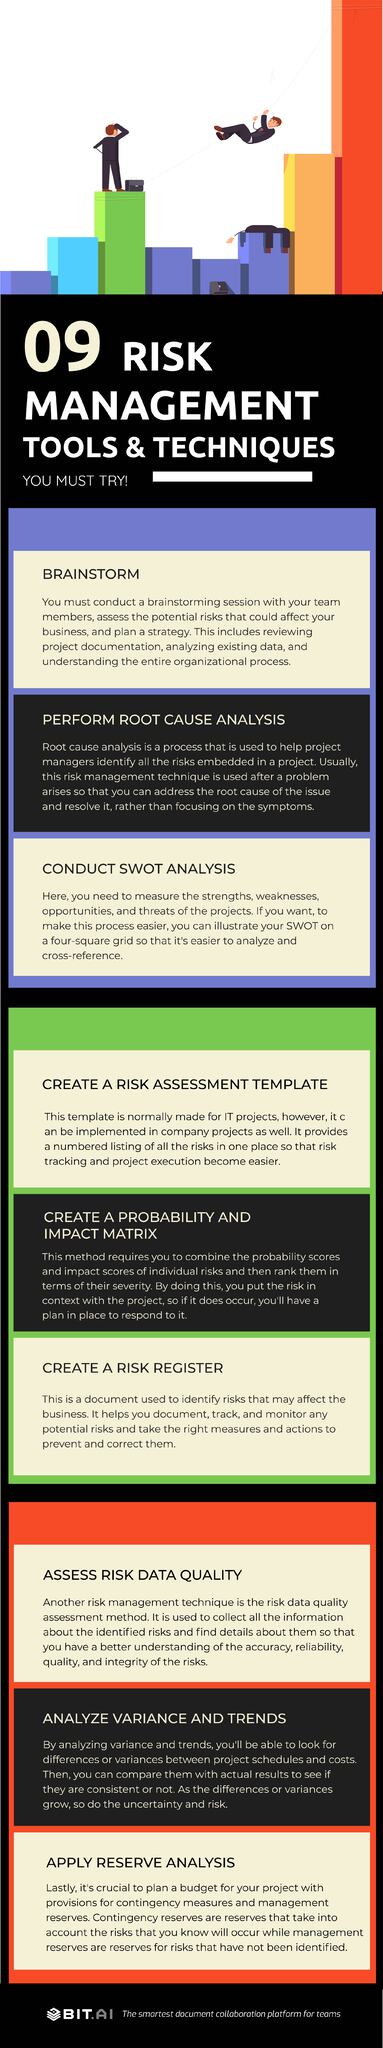 Risk management tools infographic